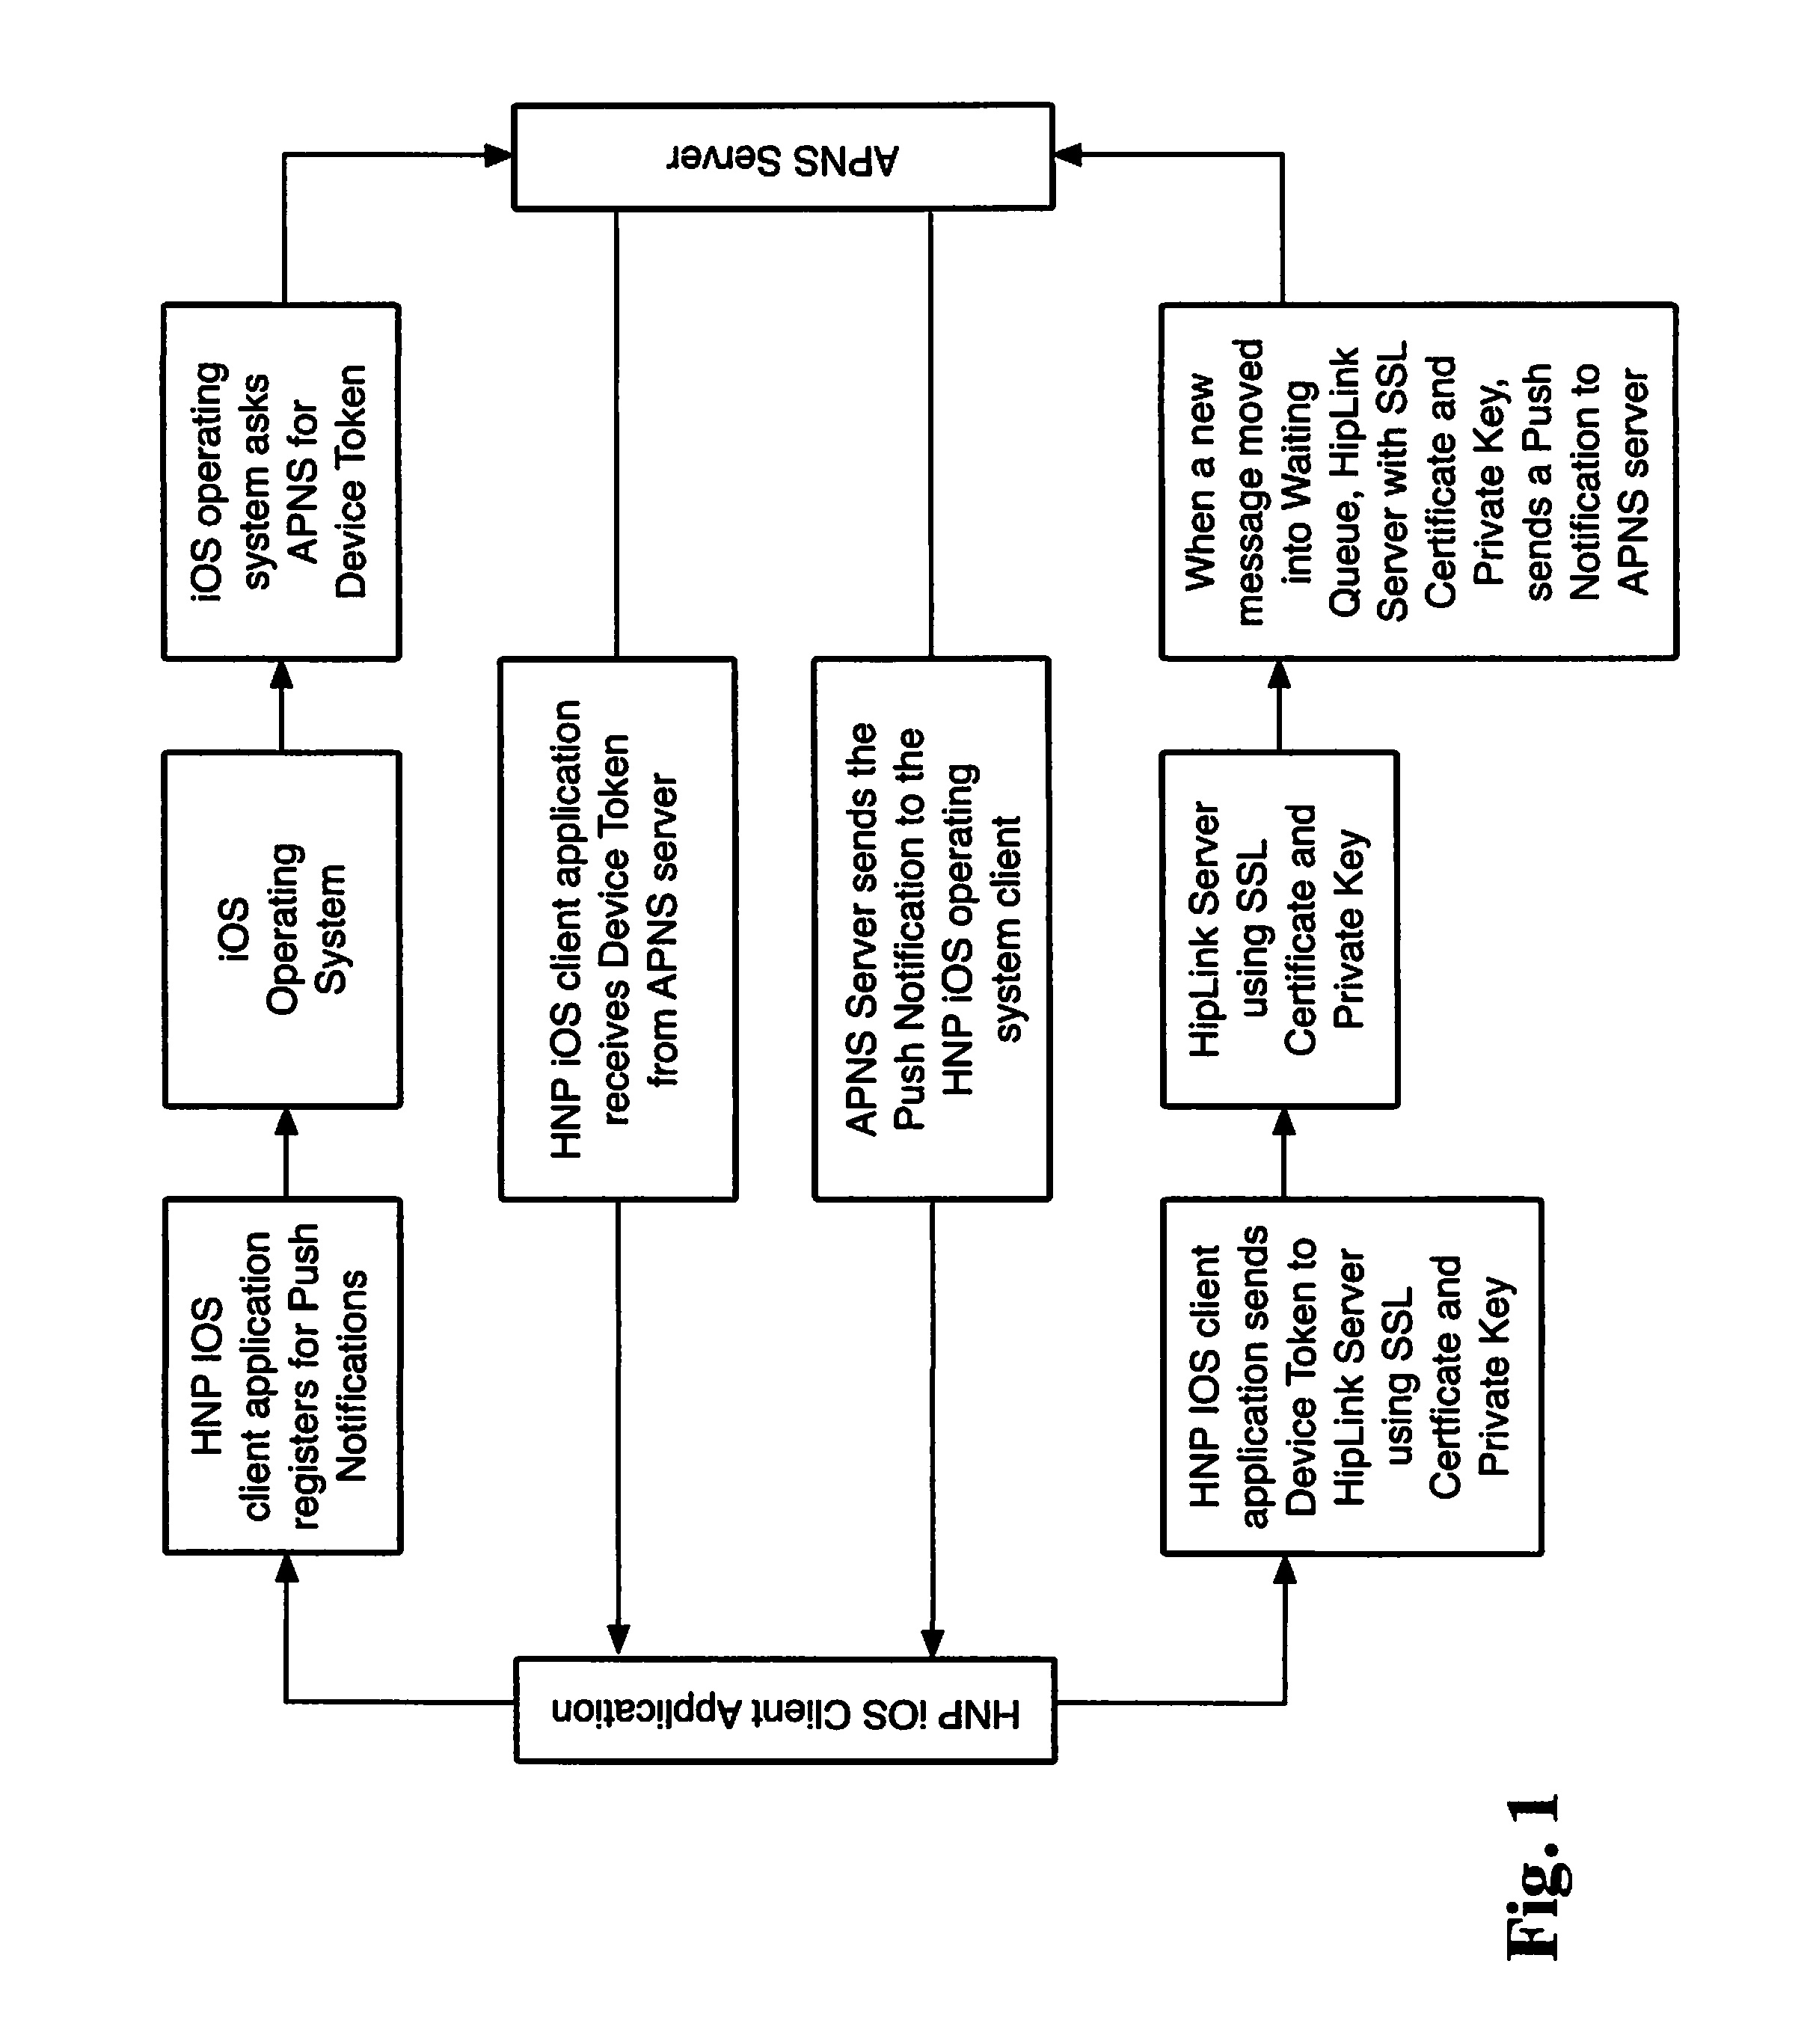 System and Method for Message Dispatching and Communication